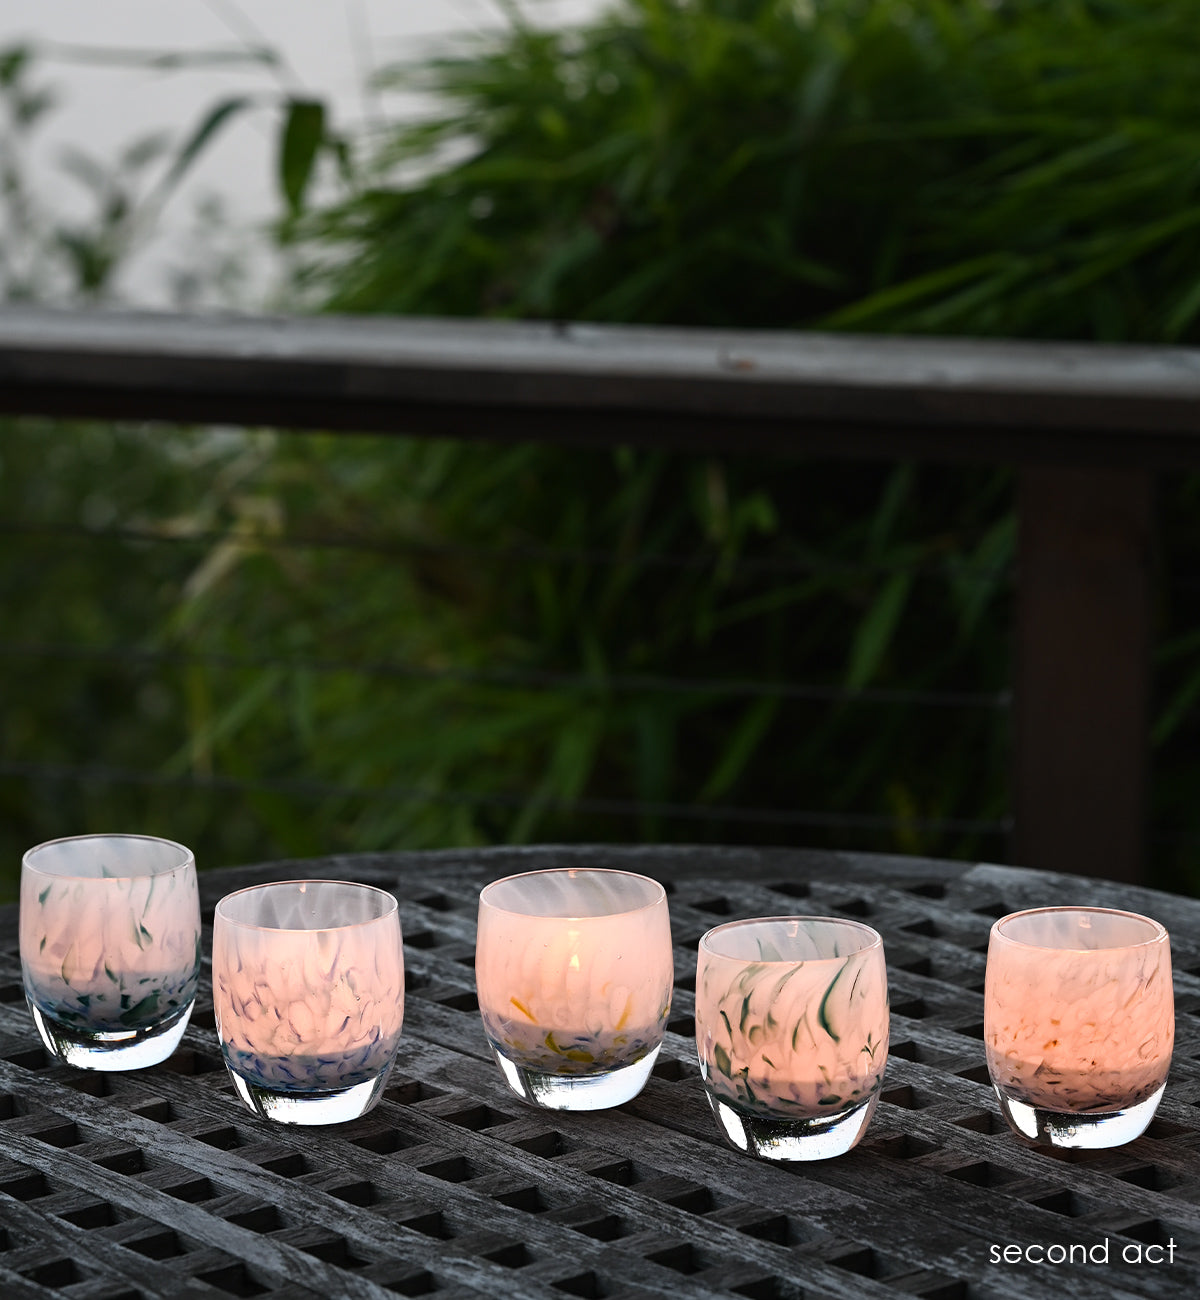  second act hand-blown glass votive candle holder made from recycled glass from 43 colors.